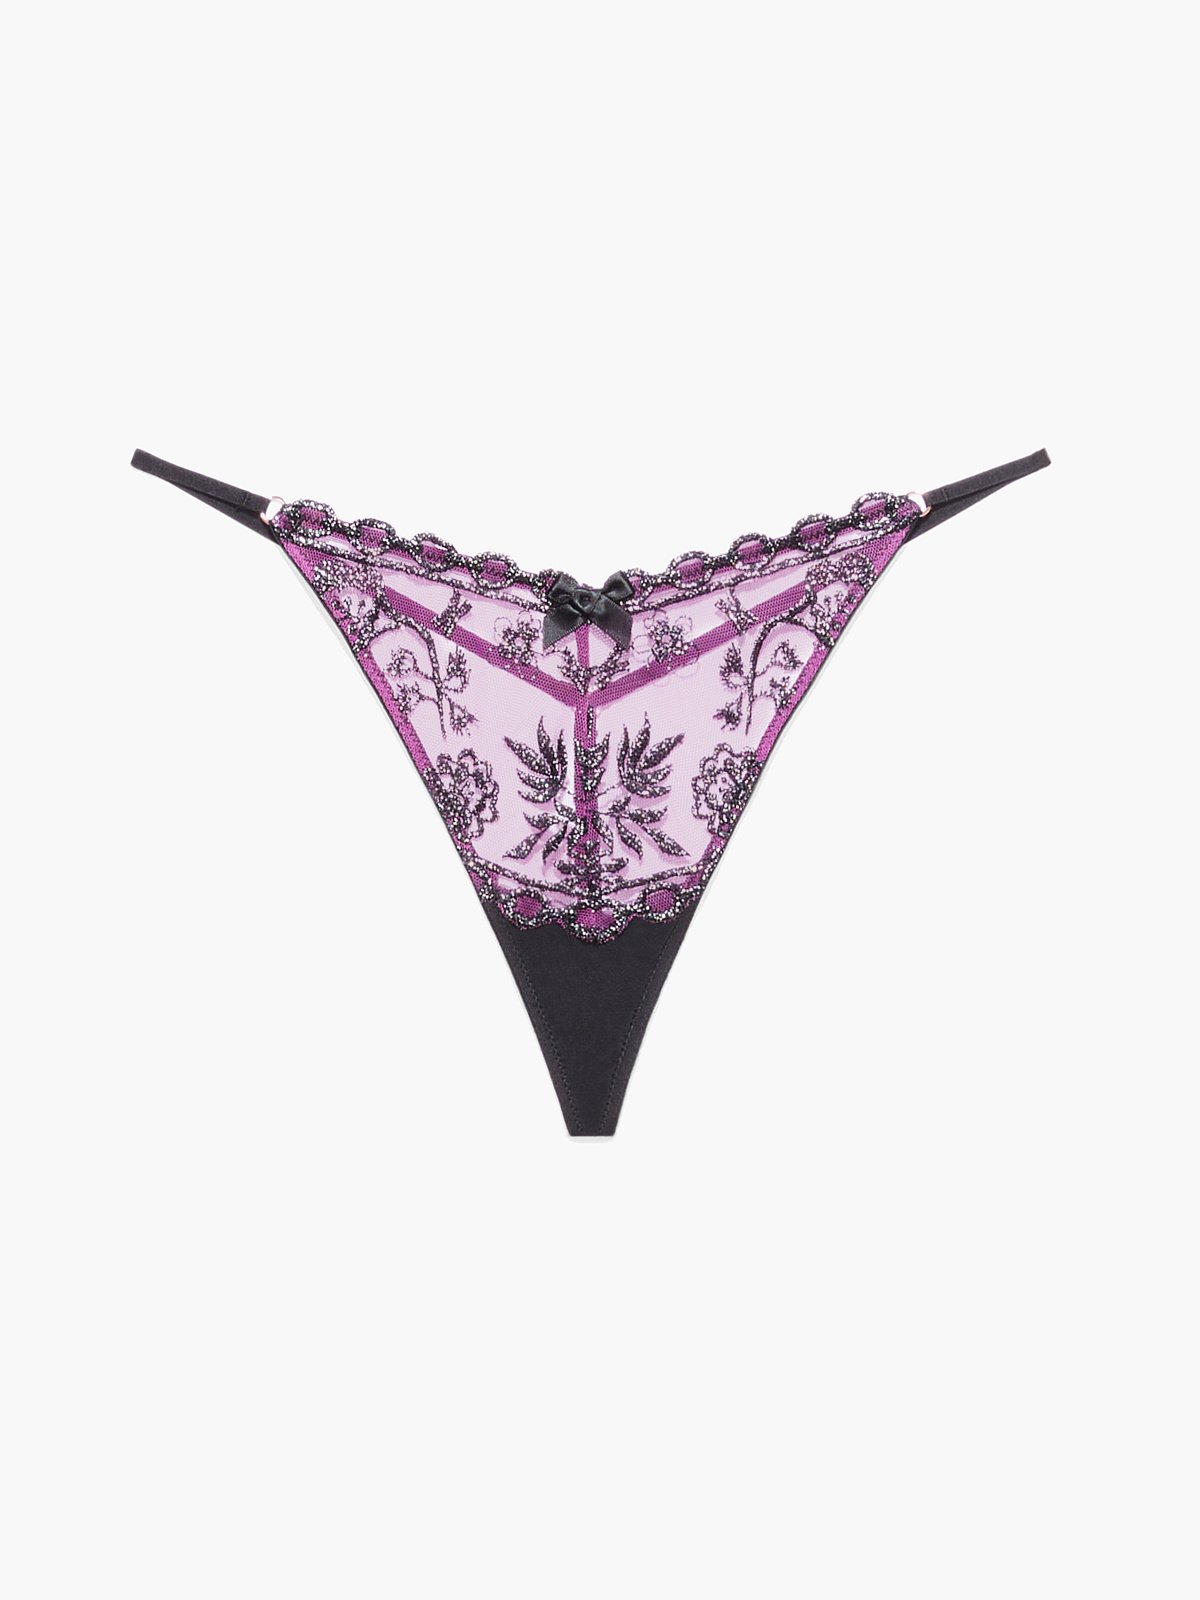 Gilded Chains Embroidered Mesh G-String Brief in Multi & Purple ...